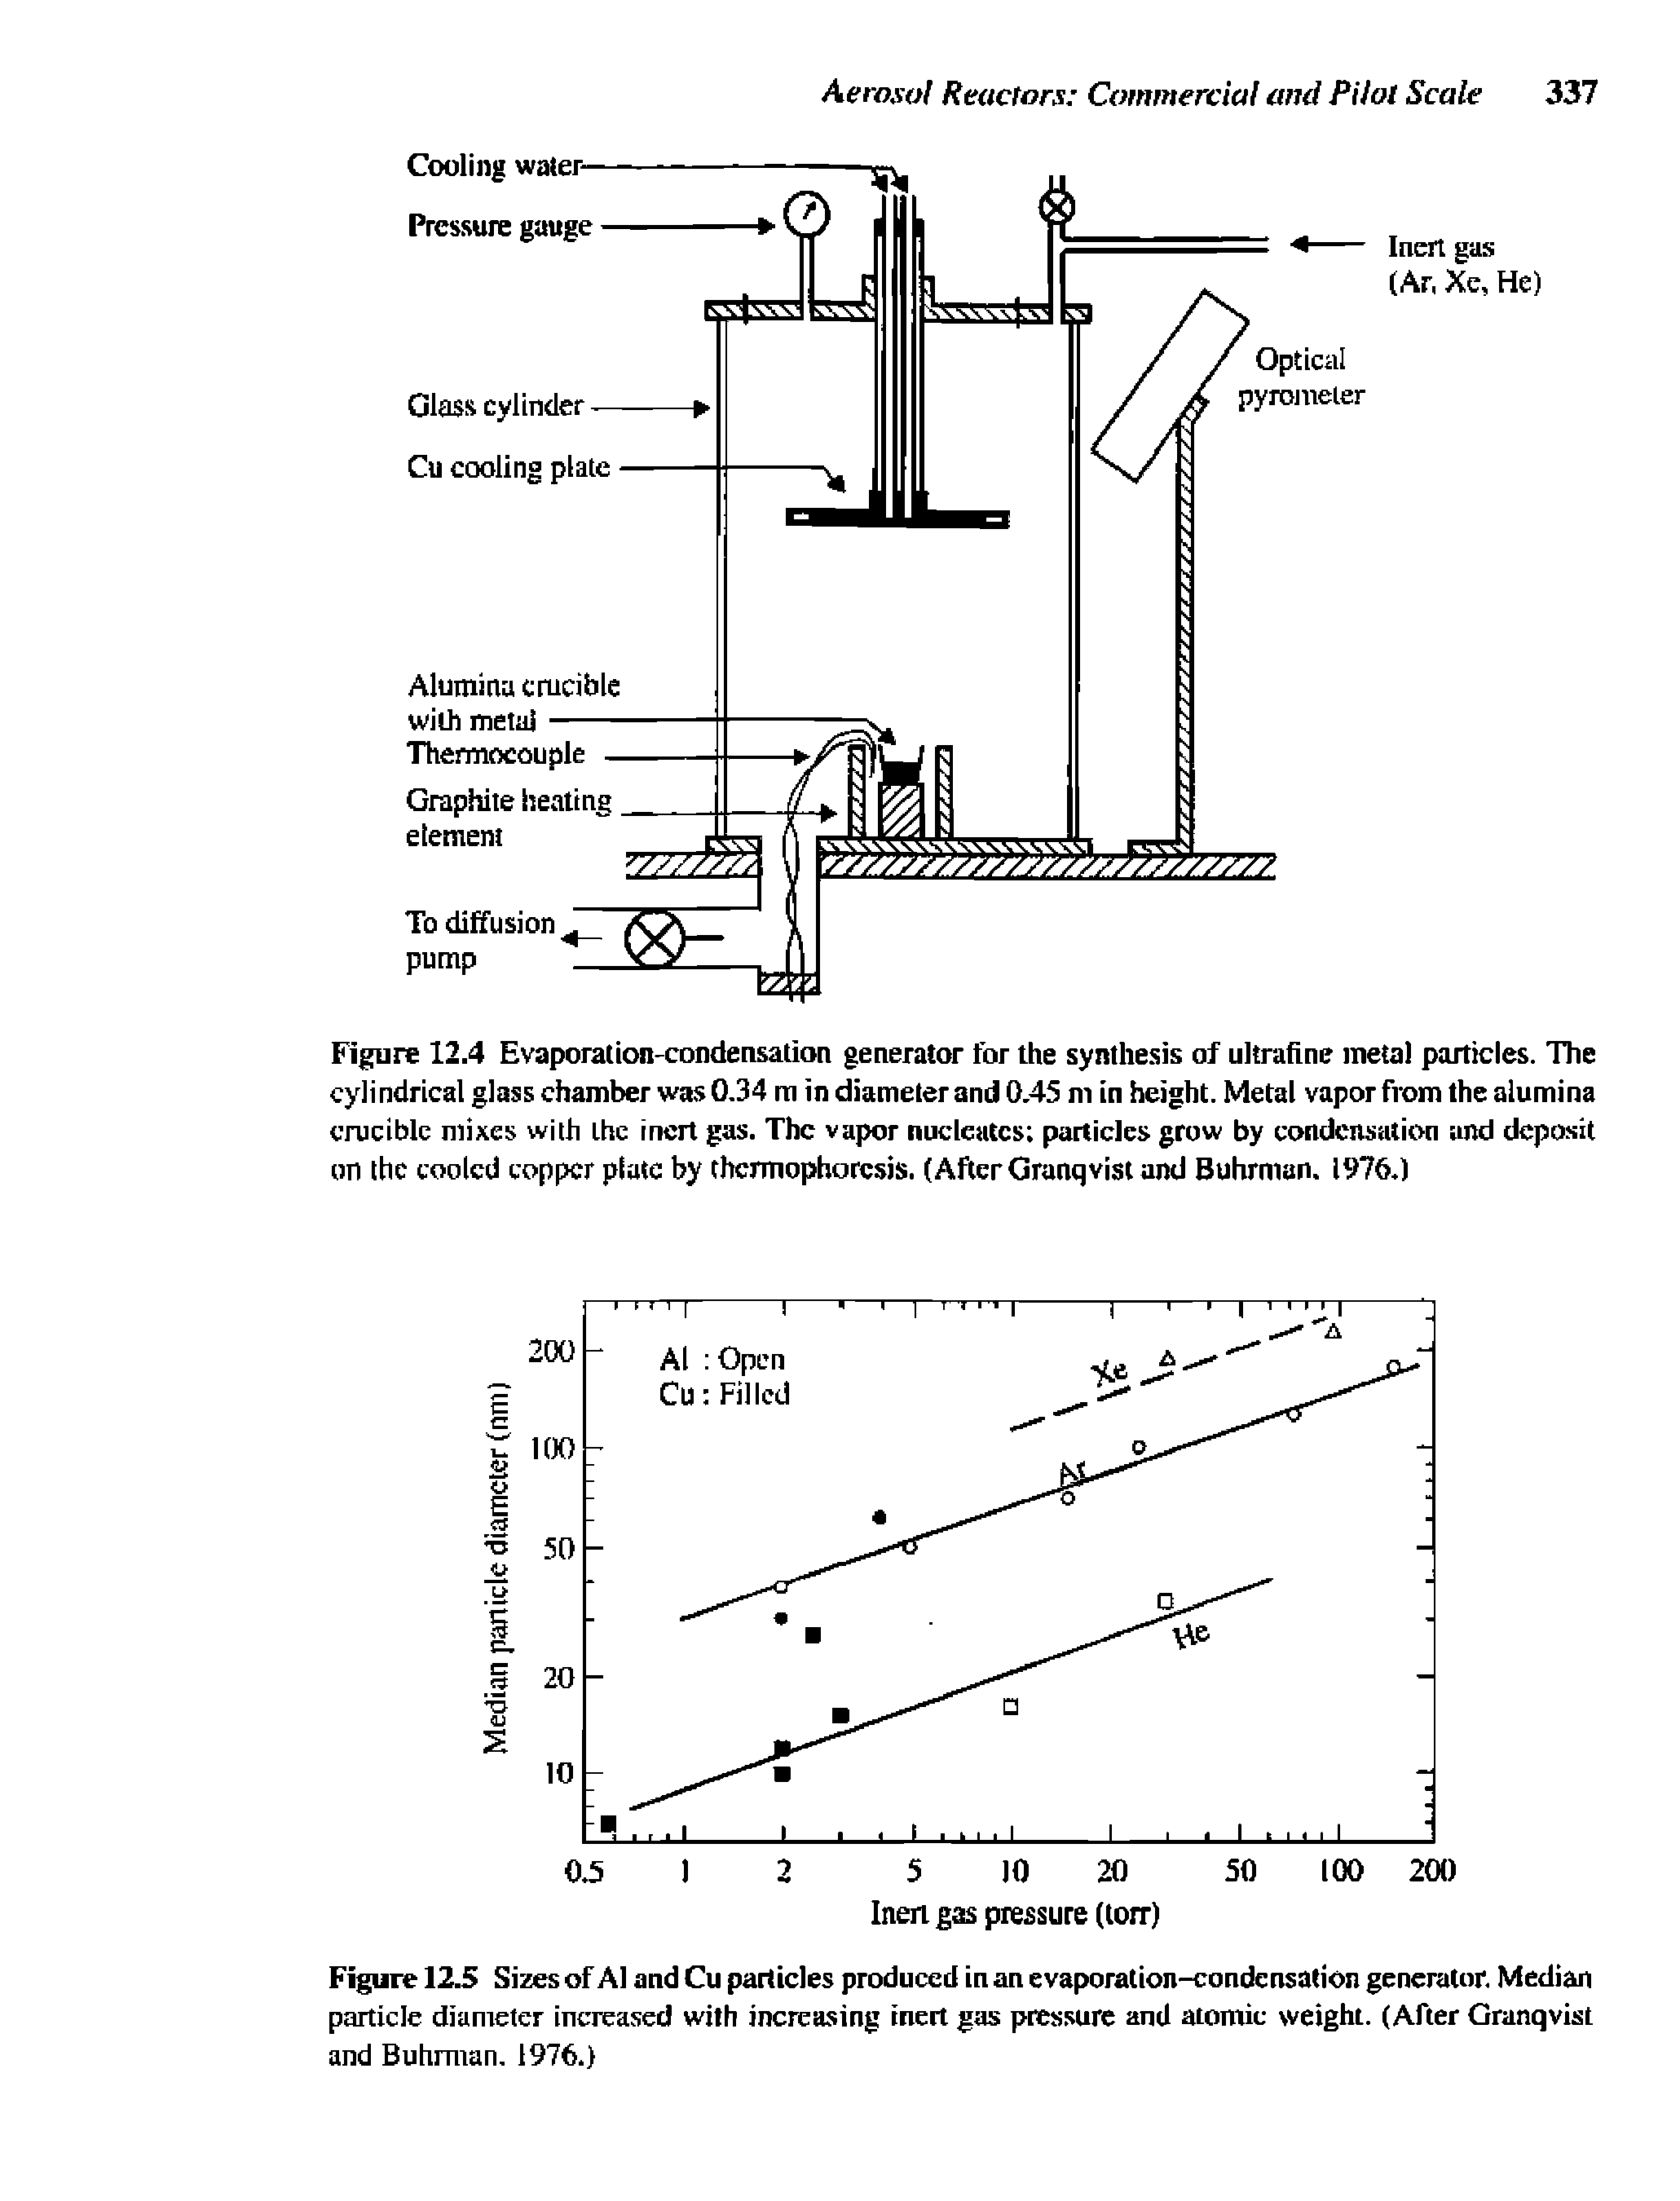 Figure 12.5 Sizes of A1 and Cu particles produced in an evaporation-condensation generator. Median particle diameter increased with increasing inert gas pressure and atomic weight. (After Granqvist and Buhrman, 1976.)...